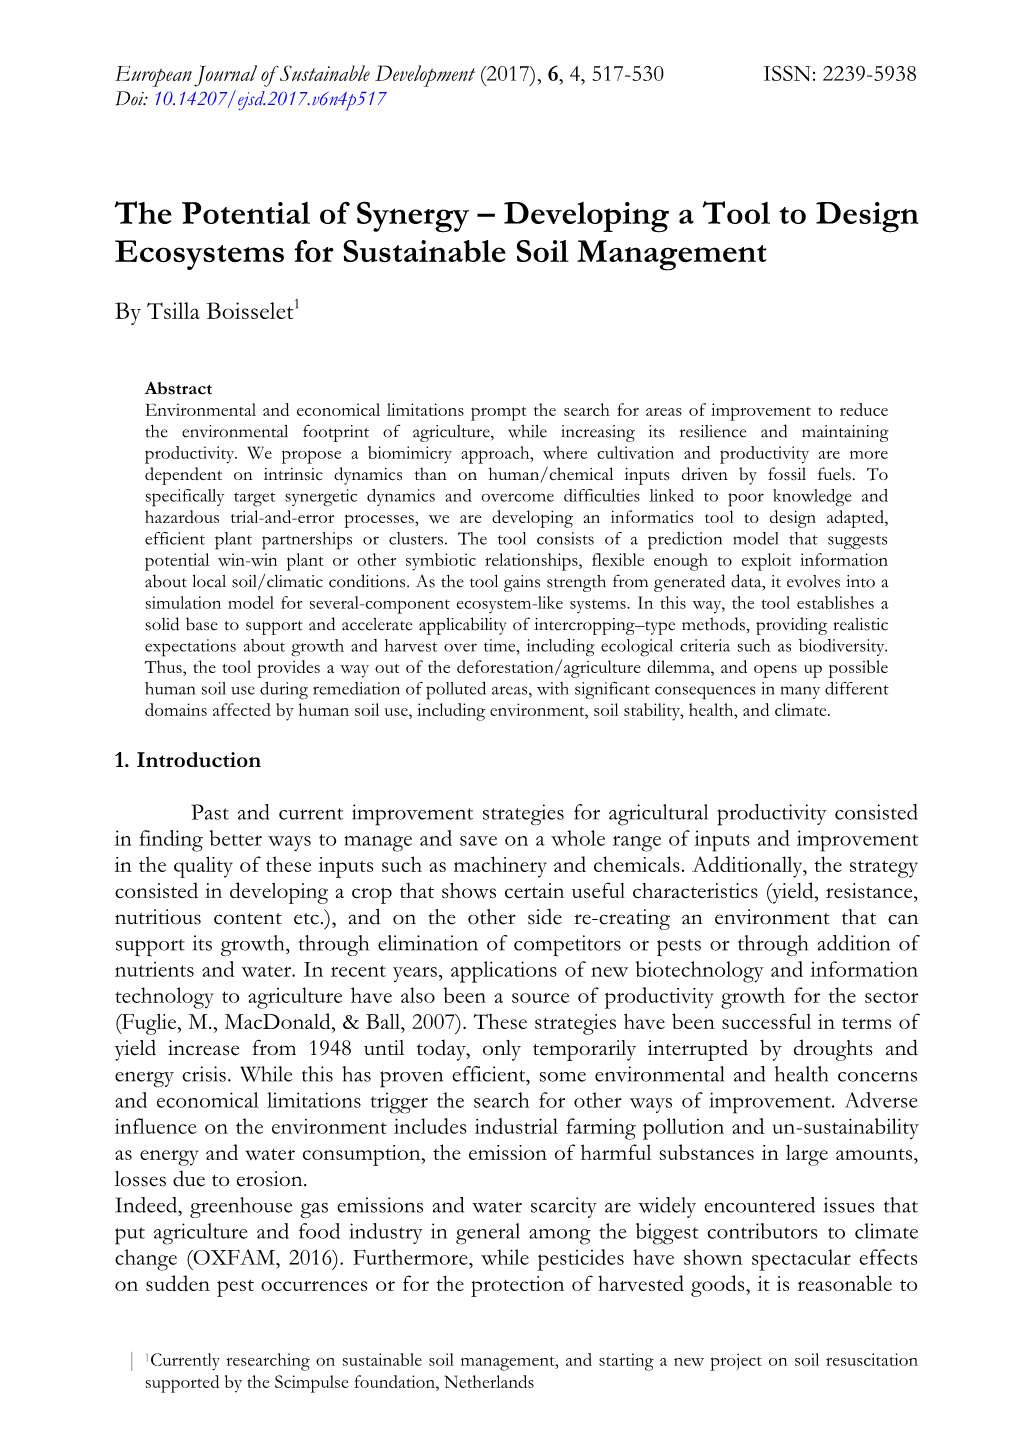 The Potential of Synergy – Developing a Tool to Design Ecosystems for Sustainable Soil Management